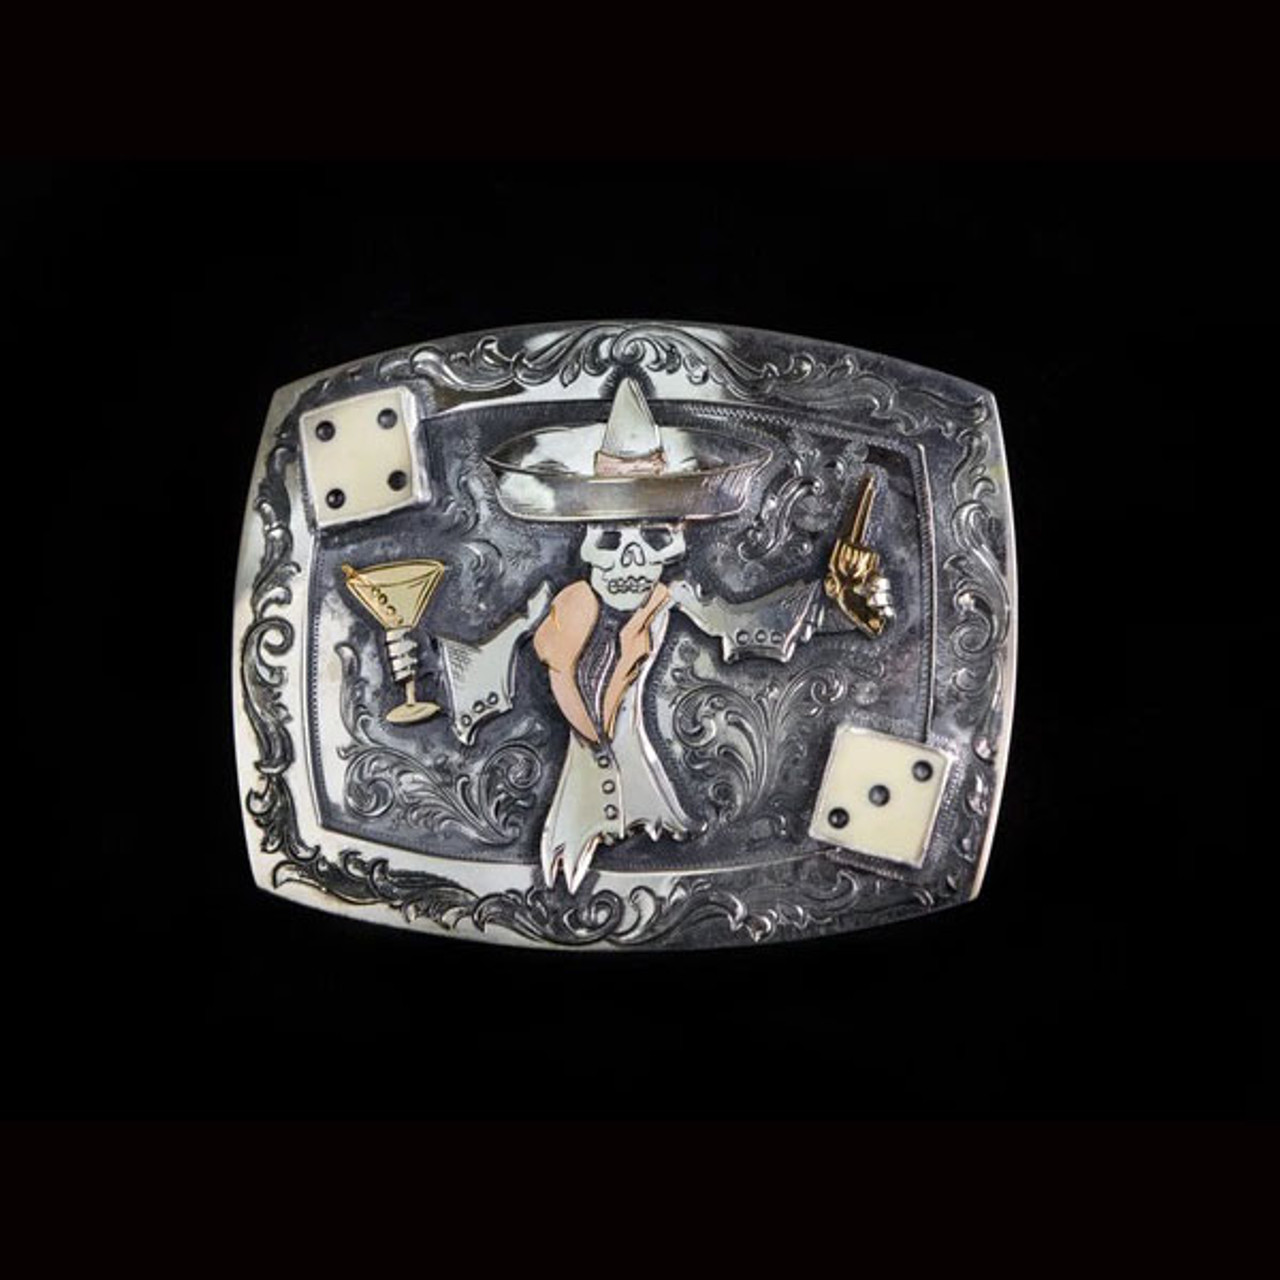 Vogt Mens Accessories - Buckle Sets - Johnny Bones Trophy Sterling Silver  and Gold Buckle - Billy's Western Wear